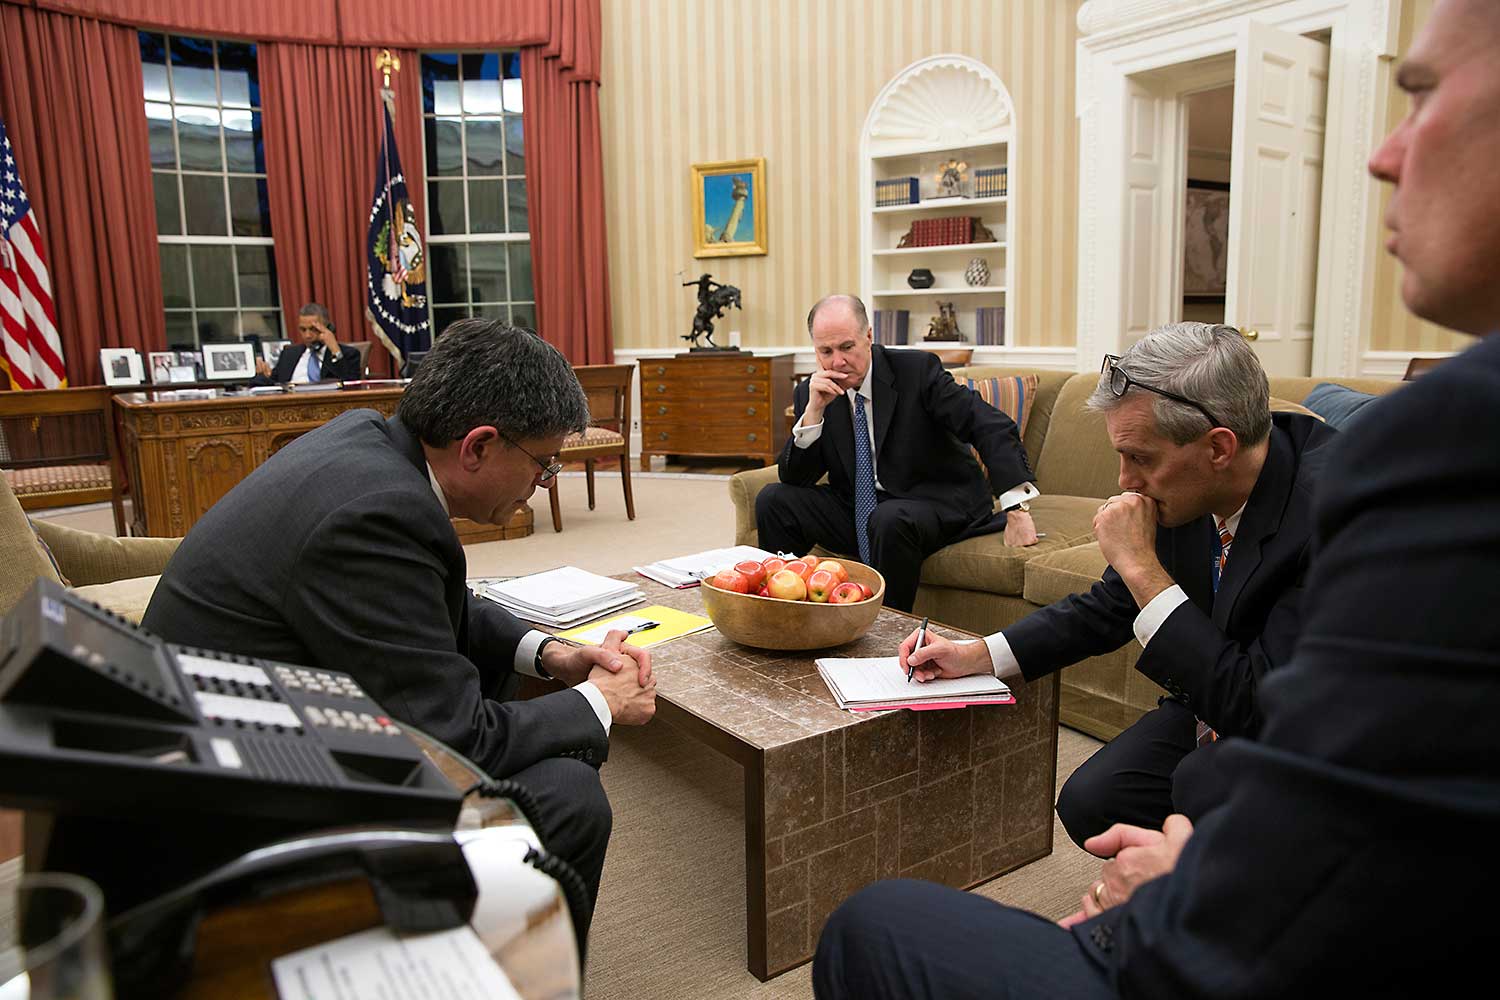 President Barack Obama has a foreign leader phone call with President Mohammed Morsi of Egypt about about the rocket attacks being launched from Gaza into Israel, and the escalating violence in Gaza, in the Oval Office, Nov. 14, 2012. Chief of Staff Jack Lew, National Security Advisor Tom Donilon, and Deputy National Security Advisor Denis McDonough attend.